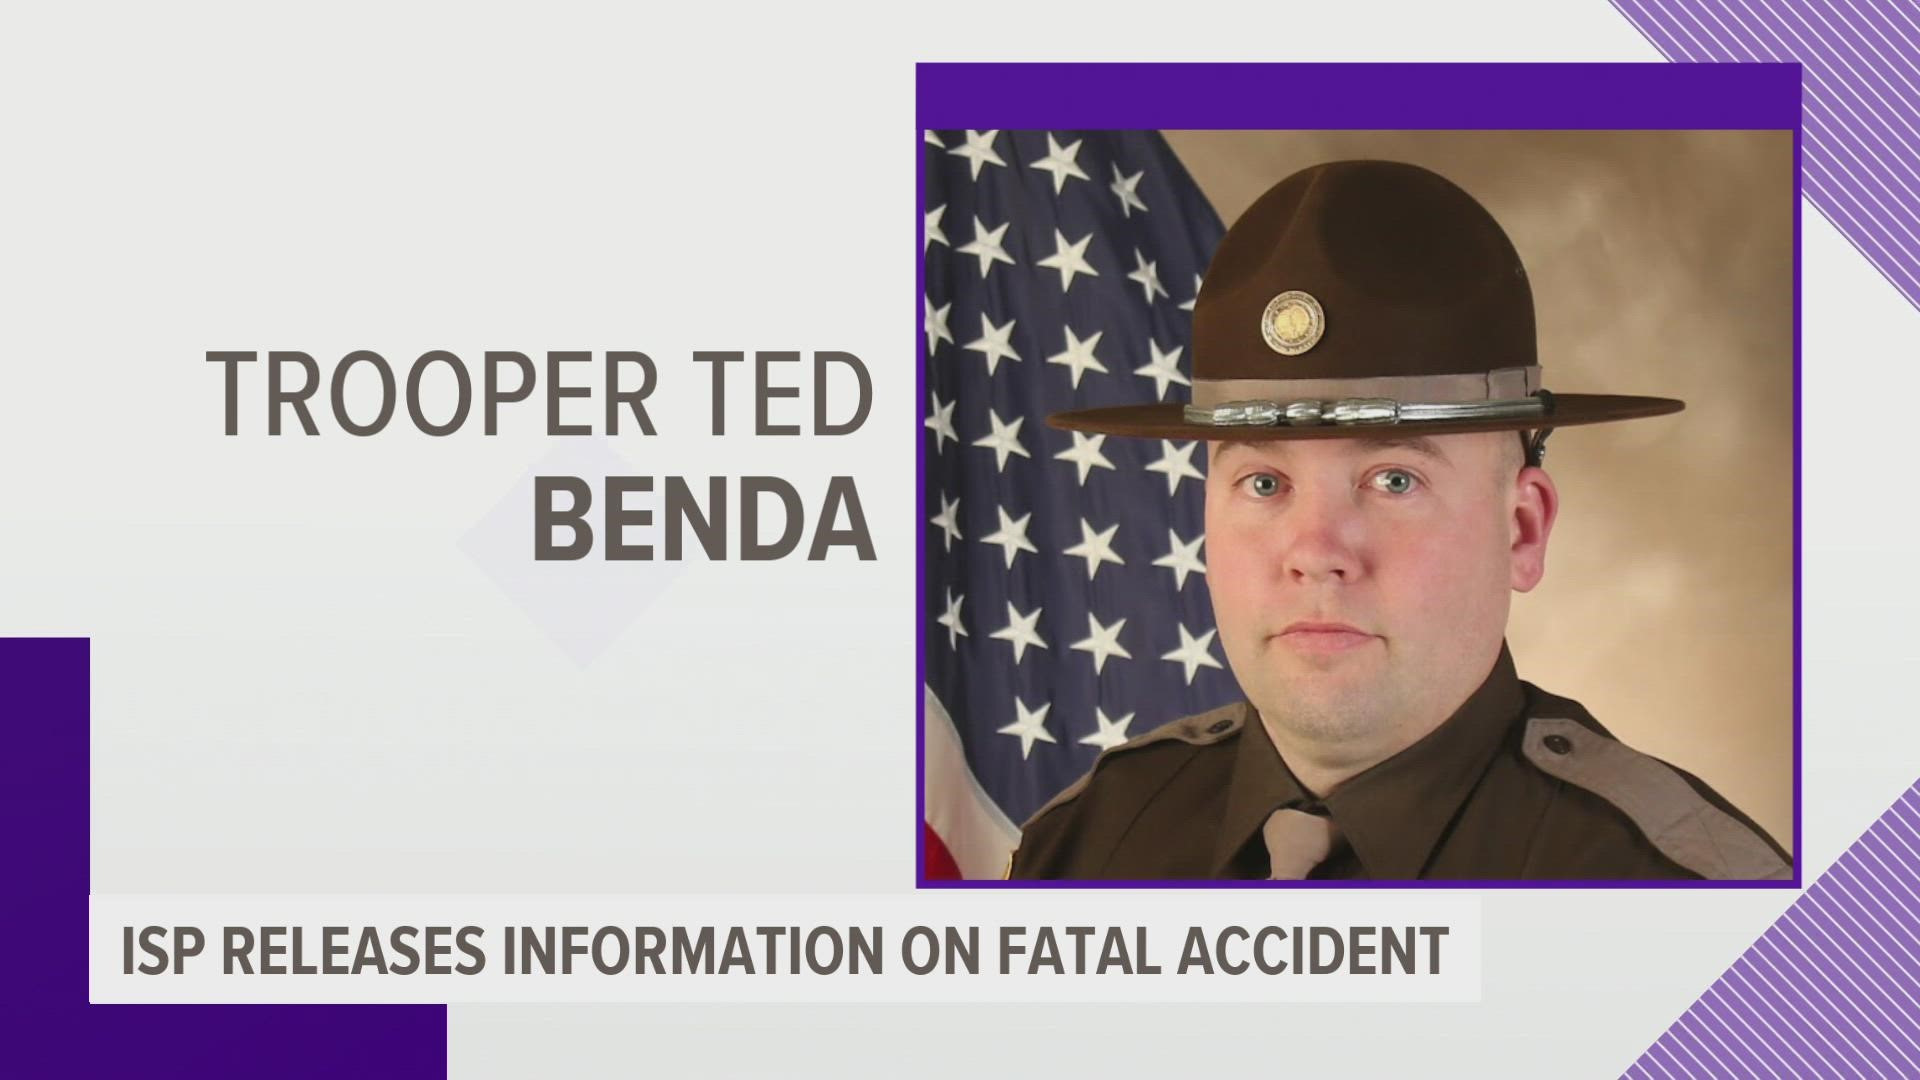 Trooper Ted Benda was in an accident on Oct. 14 and died days later. He was traveling at a high rate of speed before swerving and crashing into an embankment.